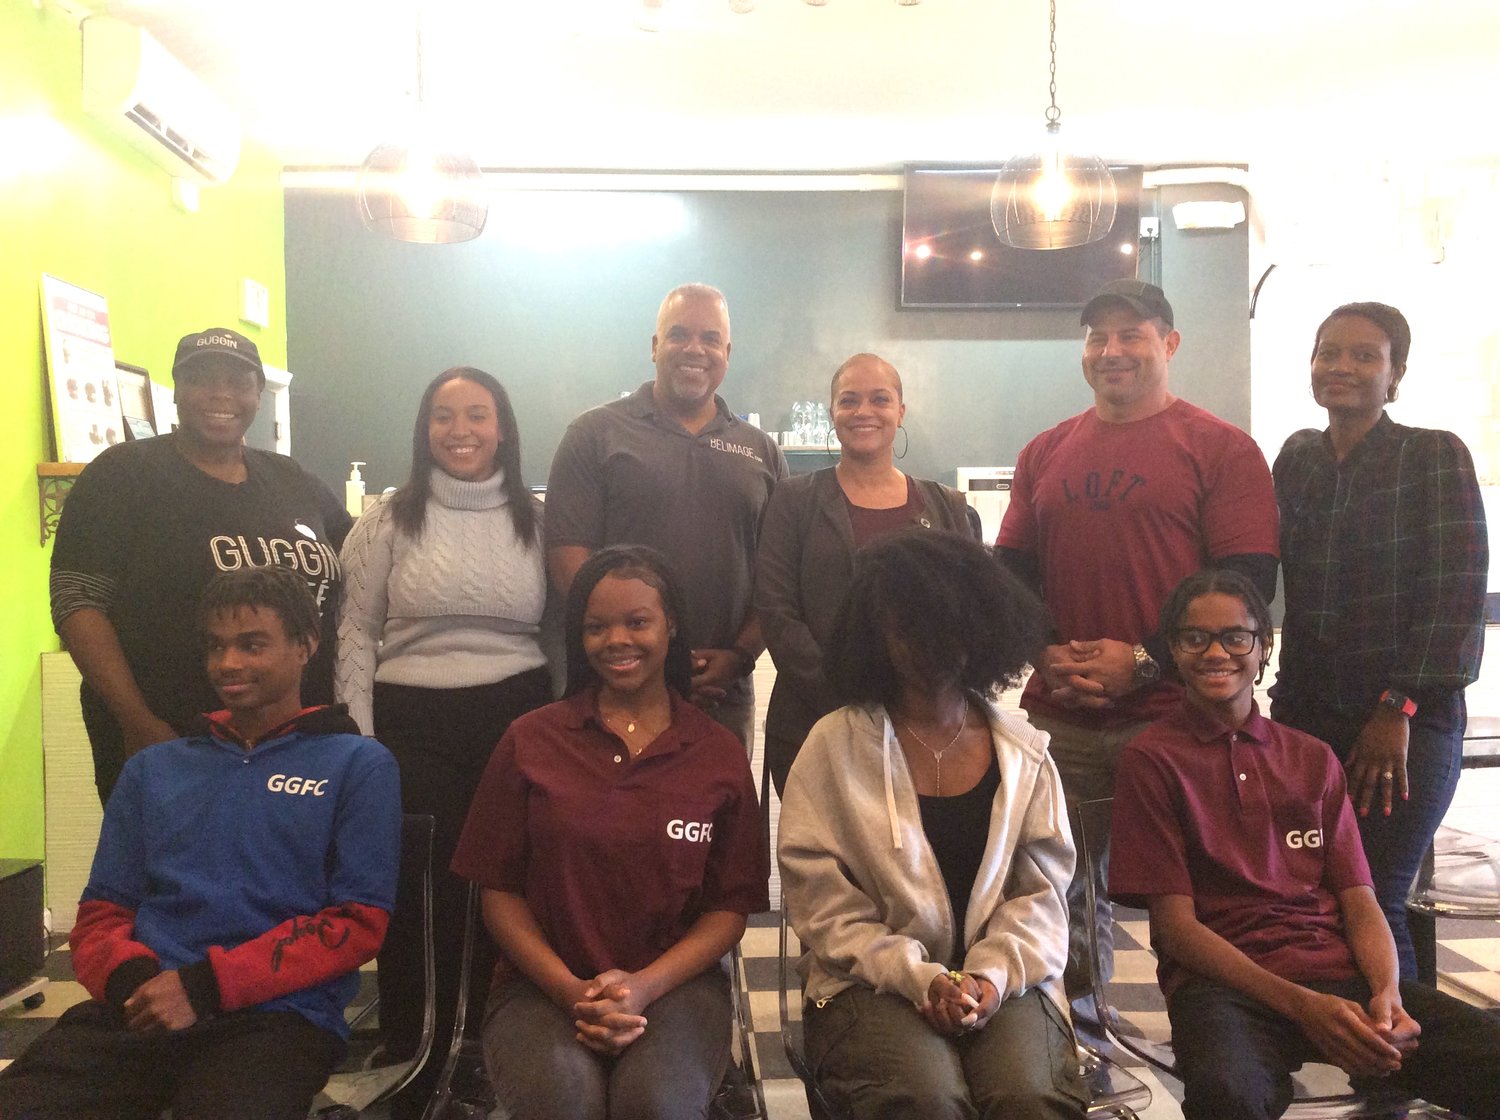 Students were awarded citations by Assemblywoman Michaelle Solages for their completion of the Student Ambassadors Program and were treated to lunch at the Guggin Café and Grill in Elmont.